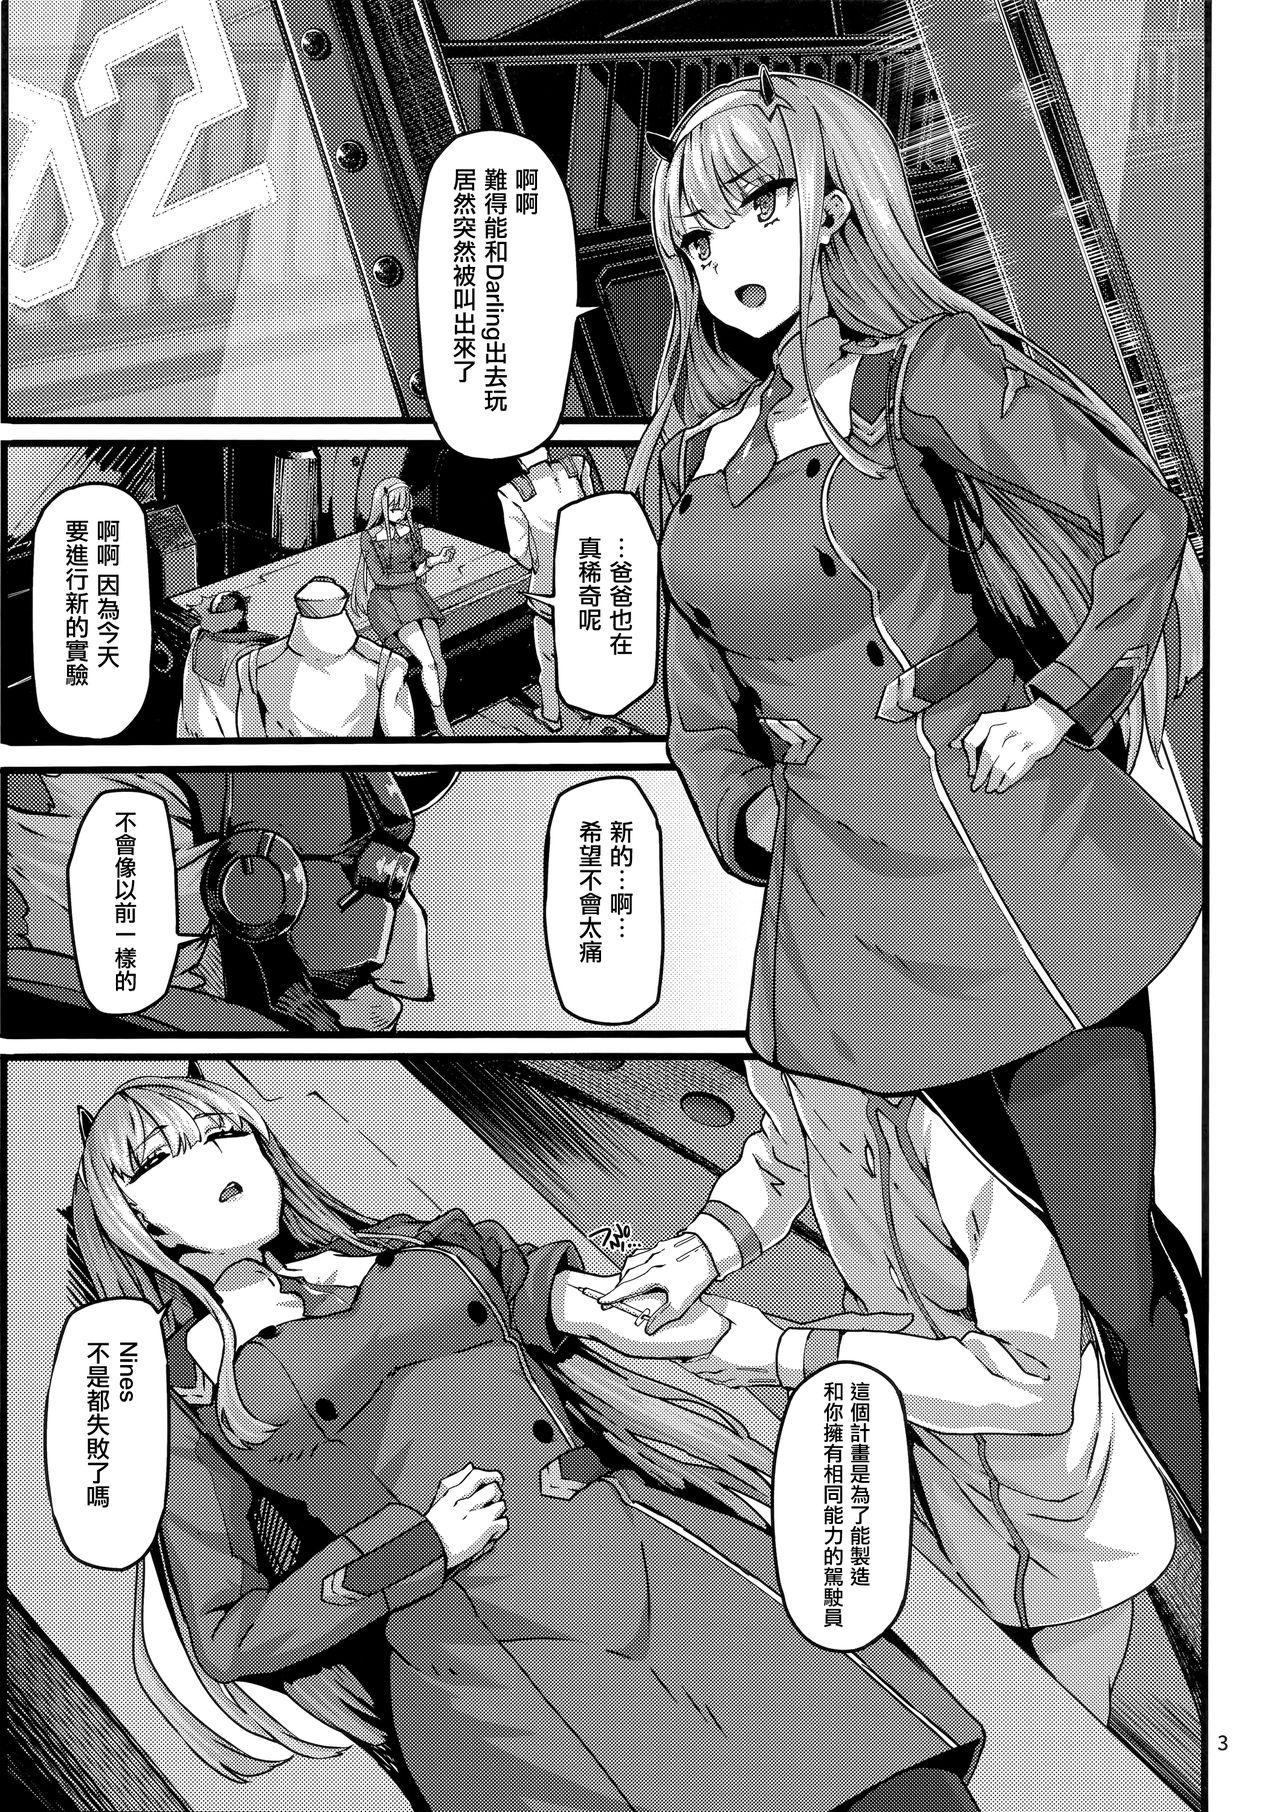 Throatfuck reginae - Darling in the franxx Young Old - Page 2